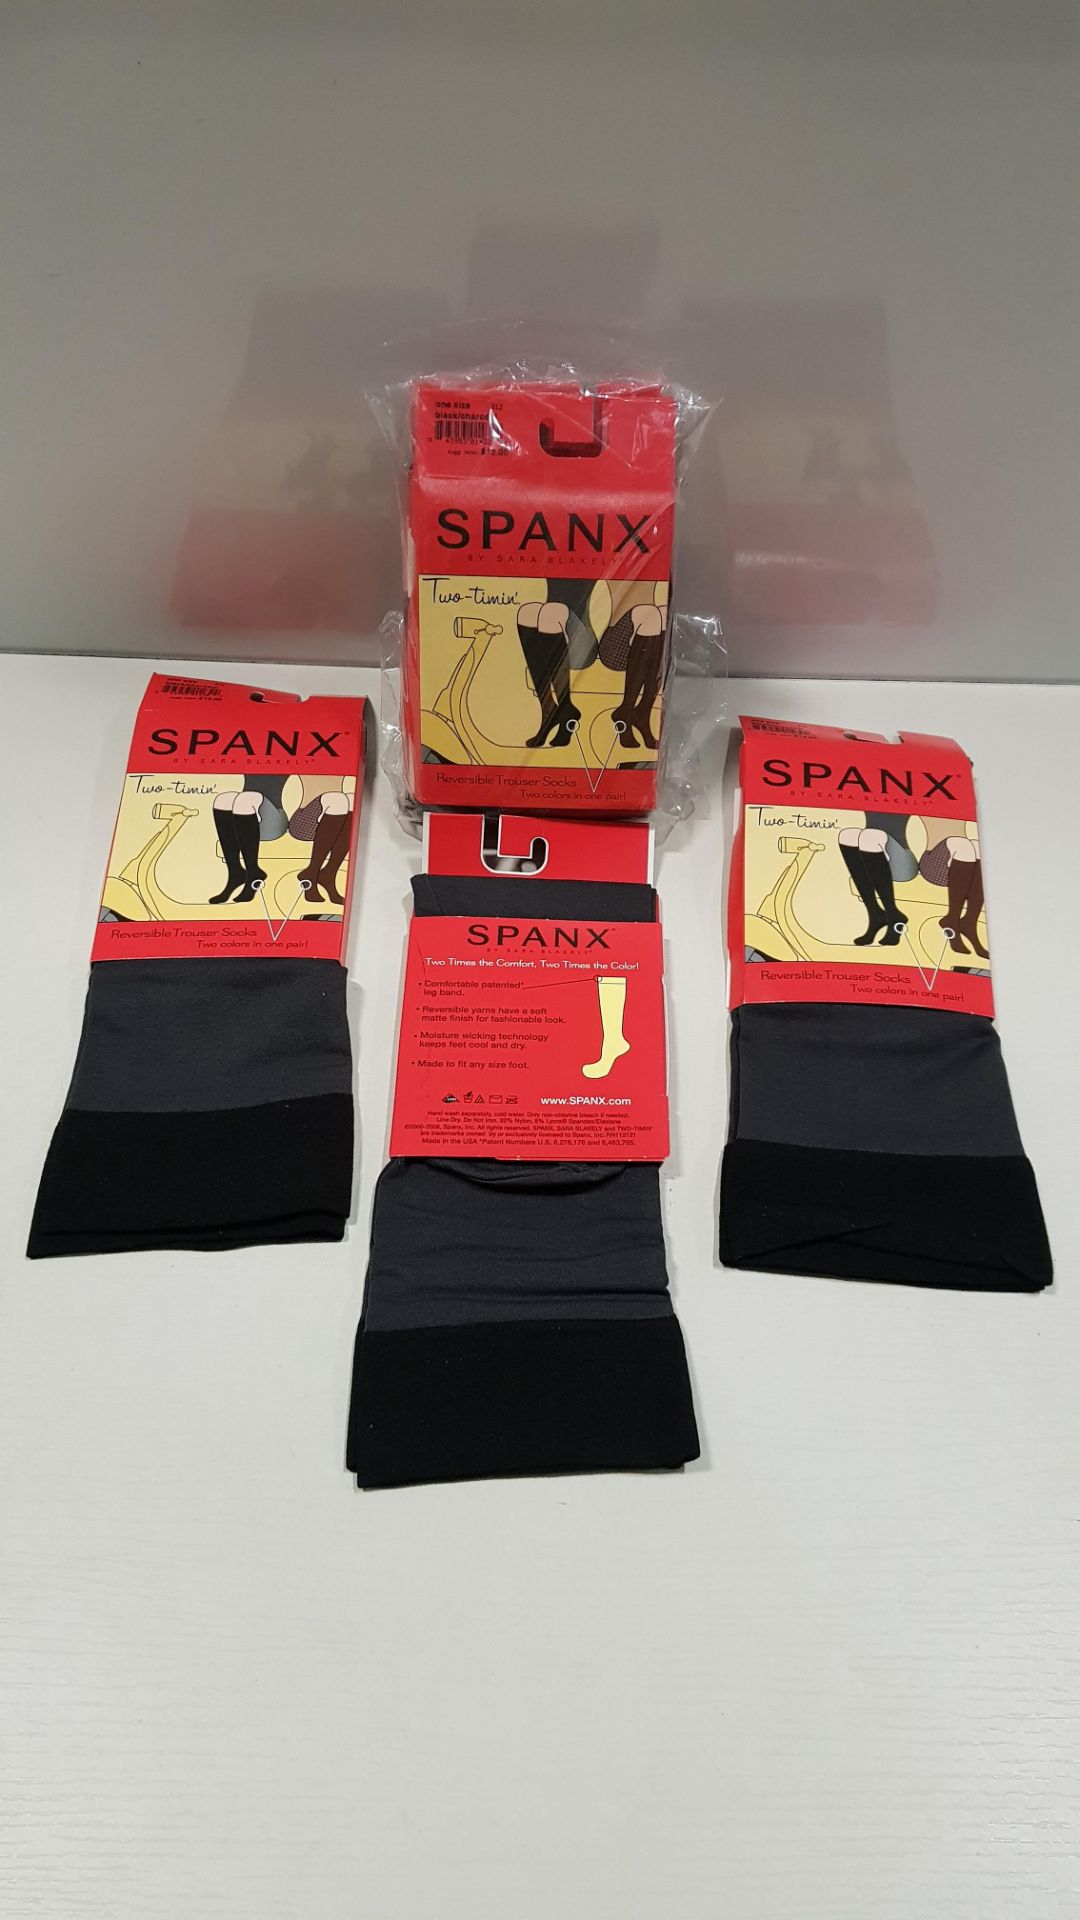 120 X BRAND NEW SPANX REVERSIBLE TROUSER SOCKS 2 COLOURS IN 1 PAIR RRP $12.00 (TOTAL RRP $1440.00)